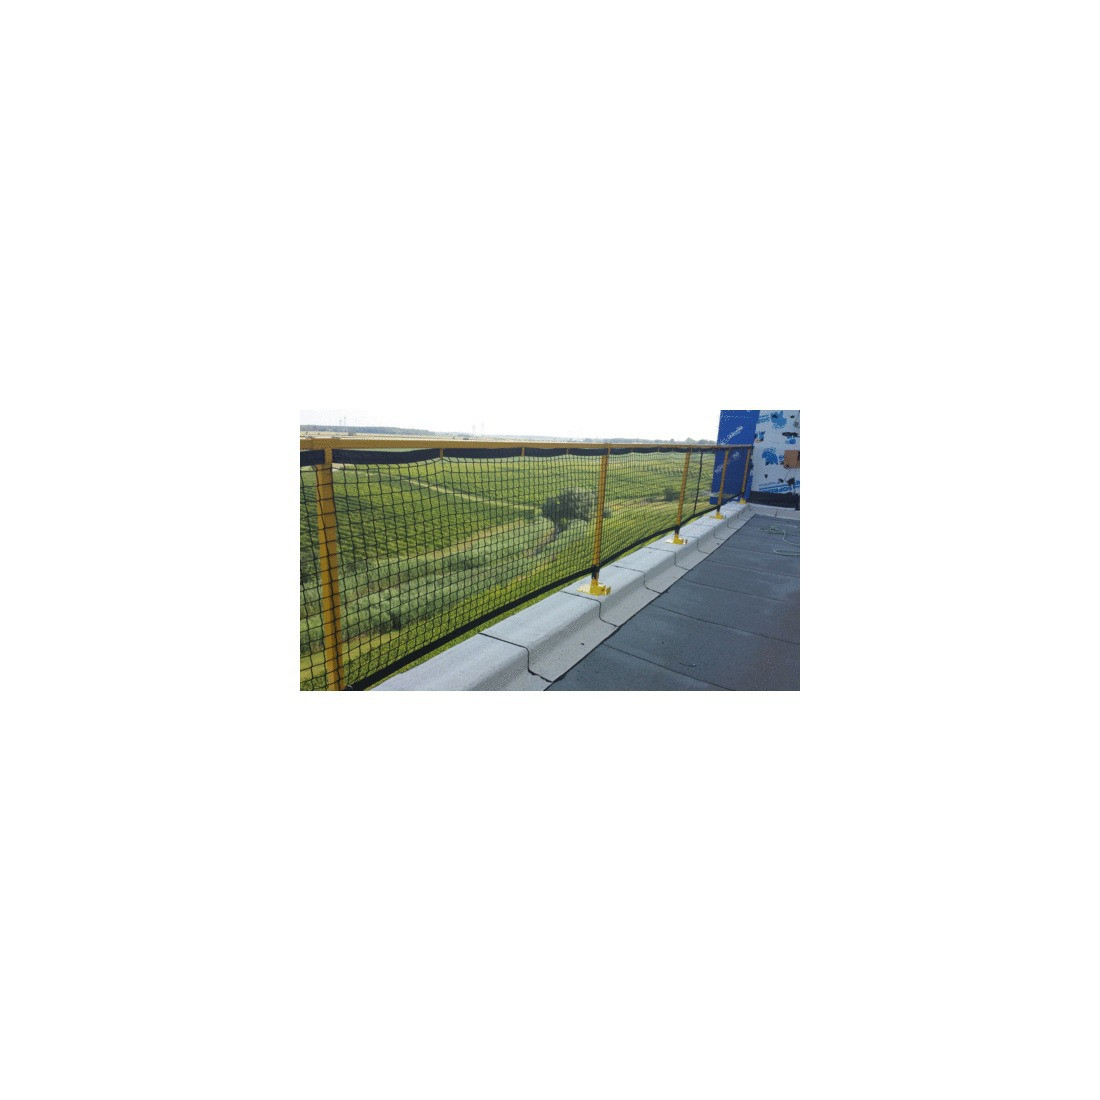 Net-fitted temporary guardrail